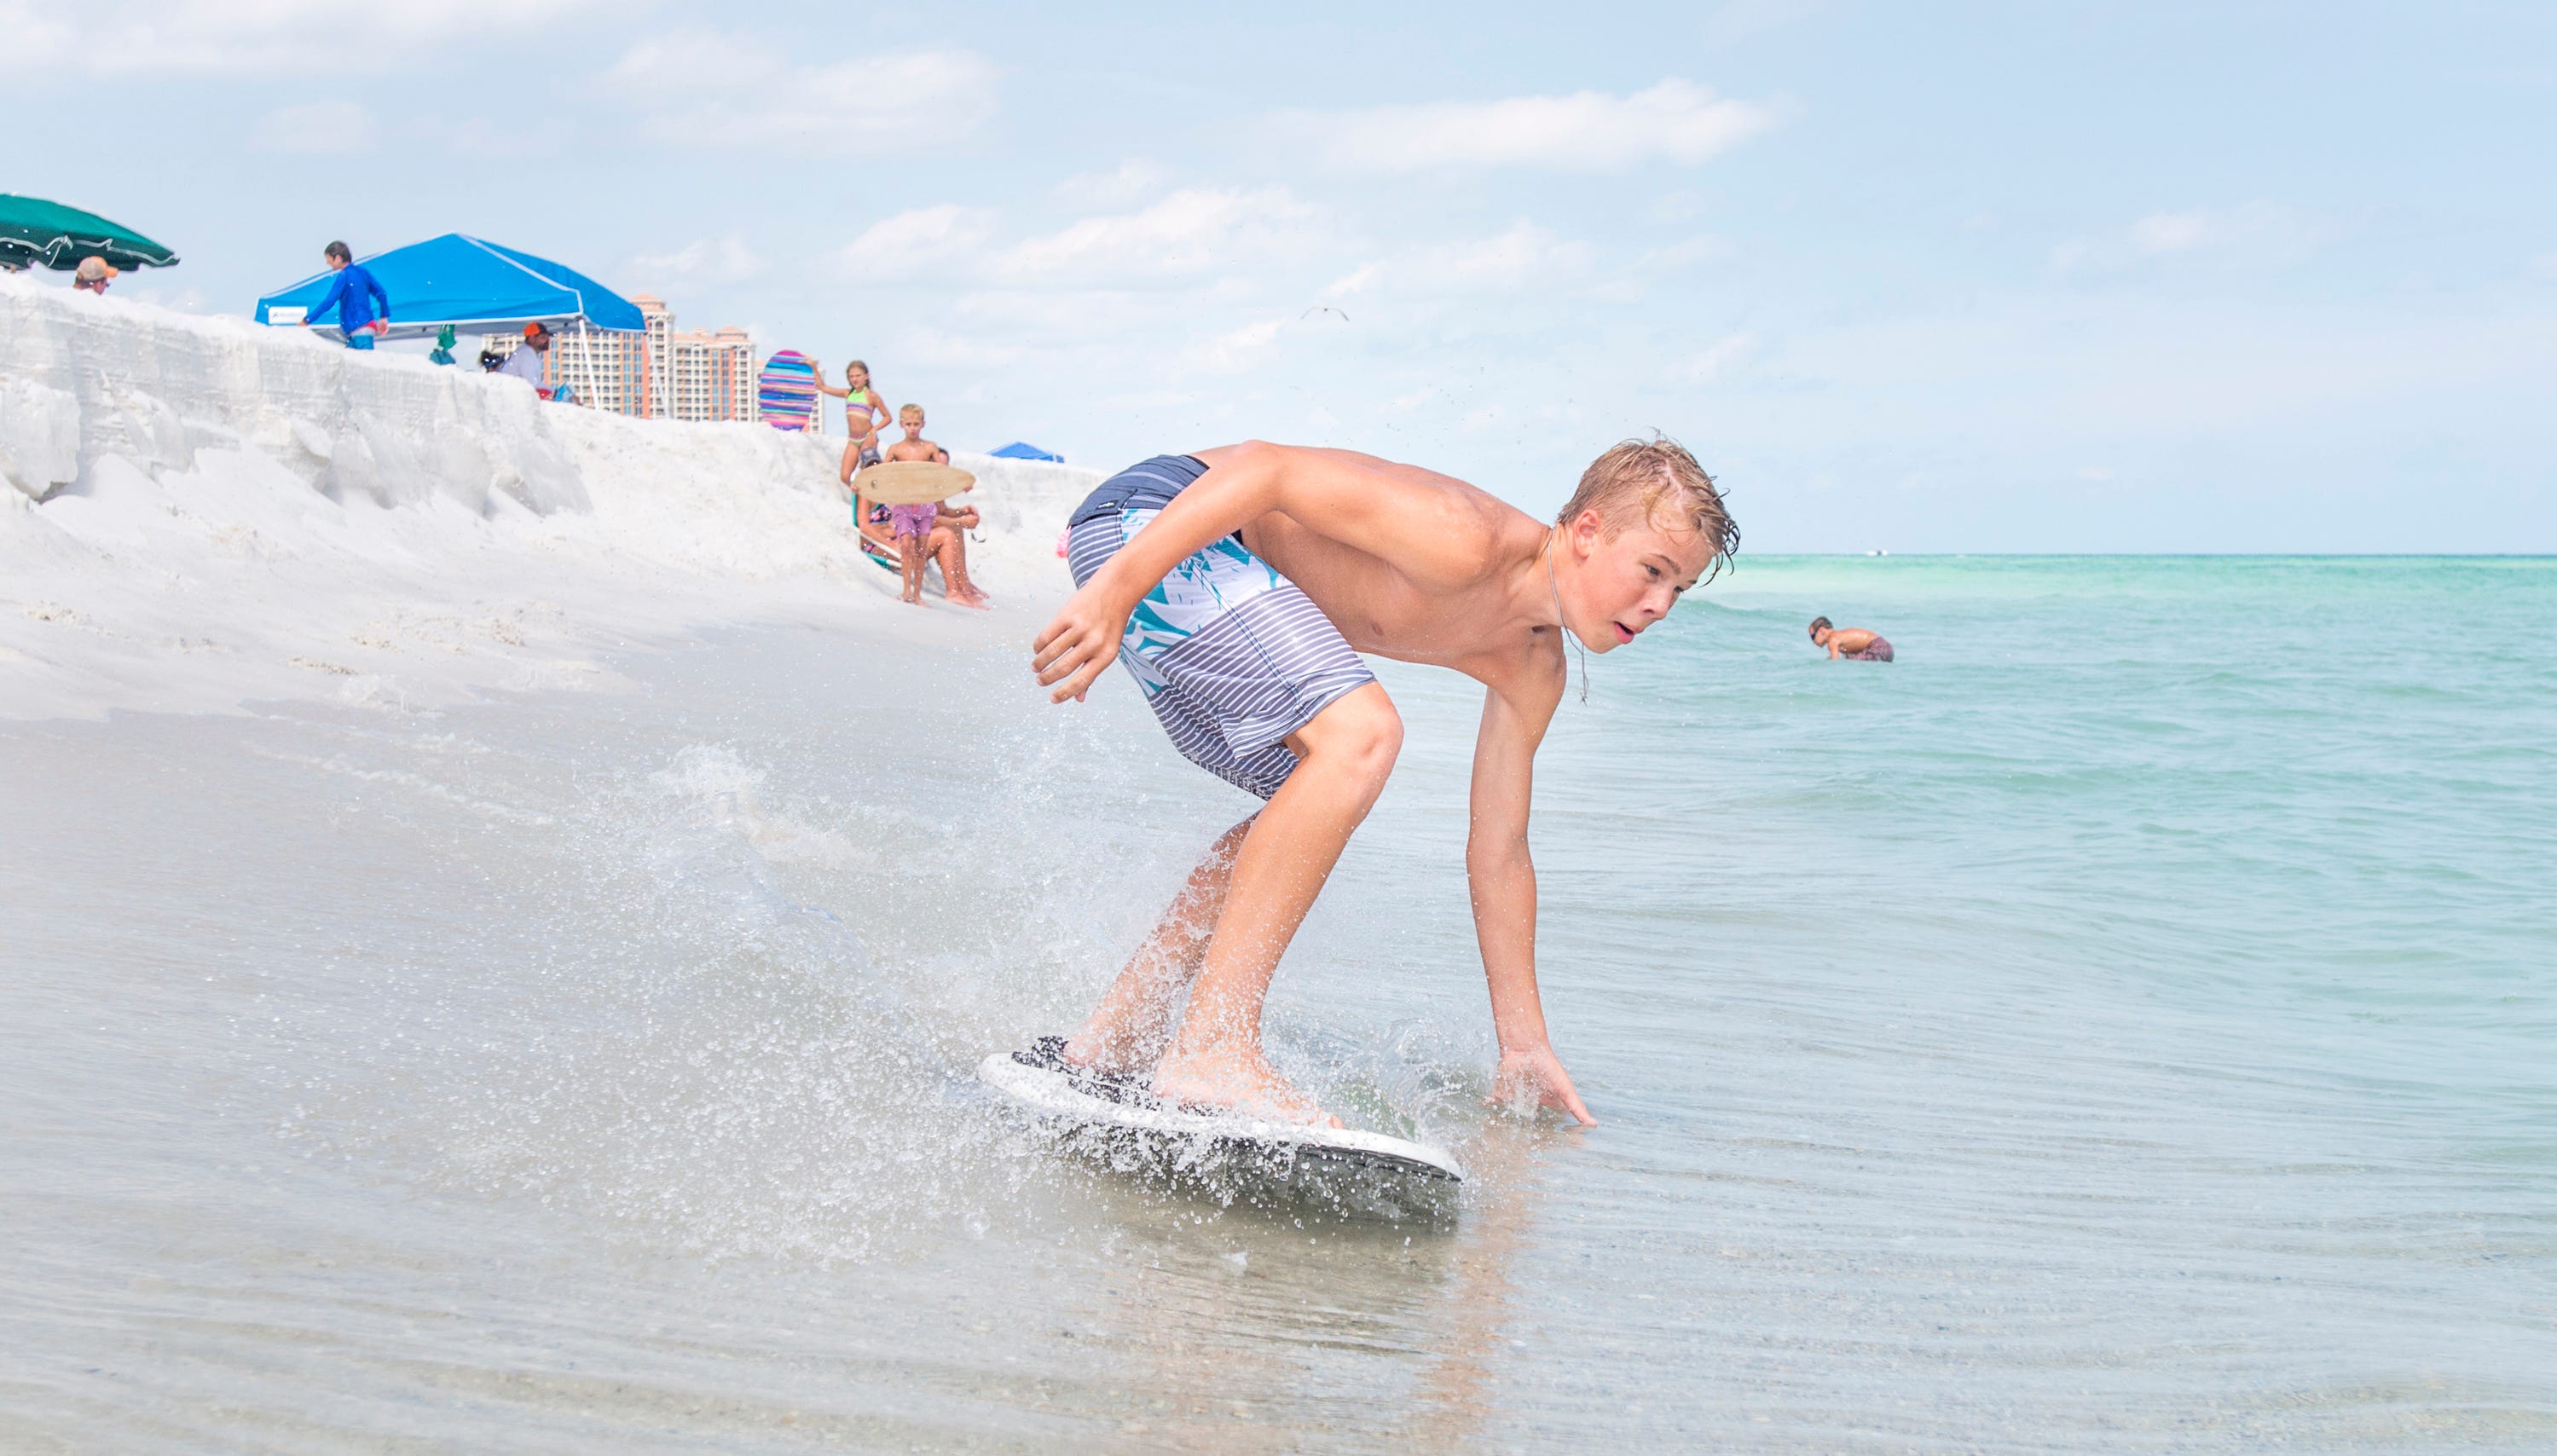 labyrint mond Vegetatie Learn how to skimboard without breaking the bank (or your wrist)